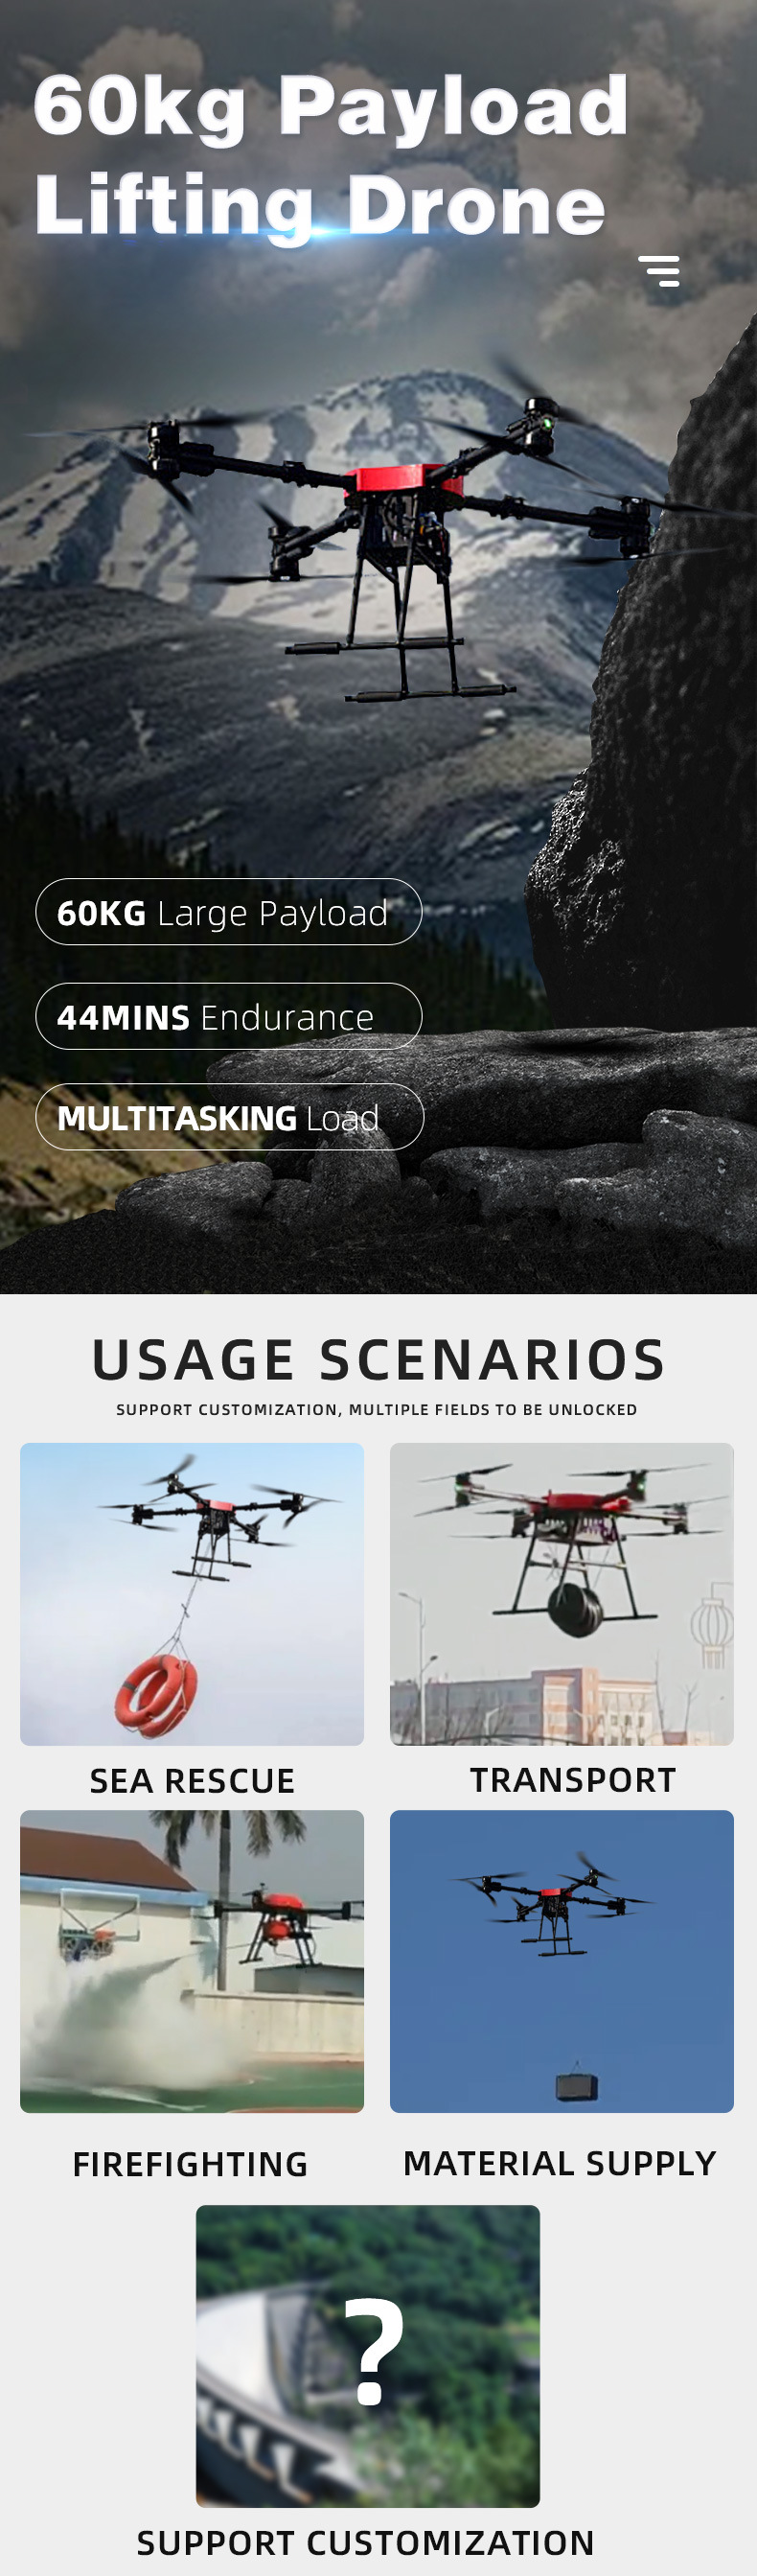 Route Planning Remote Control Optional Pods High Flight Altitude Customizable 60kg Payload Industrial Drone